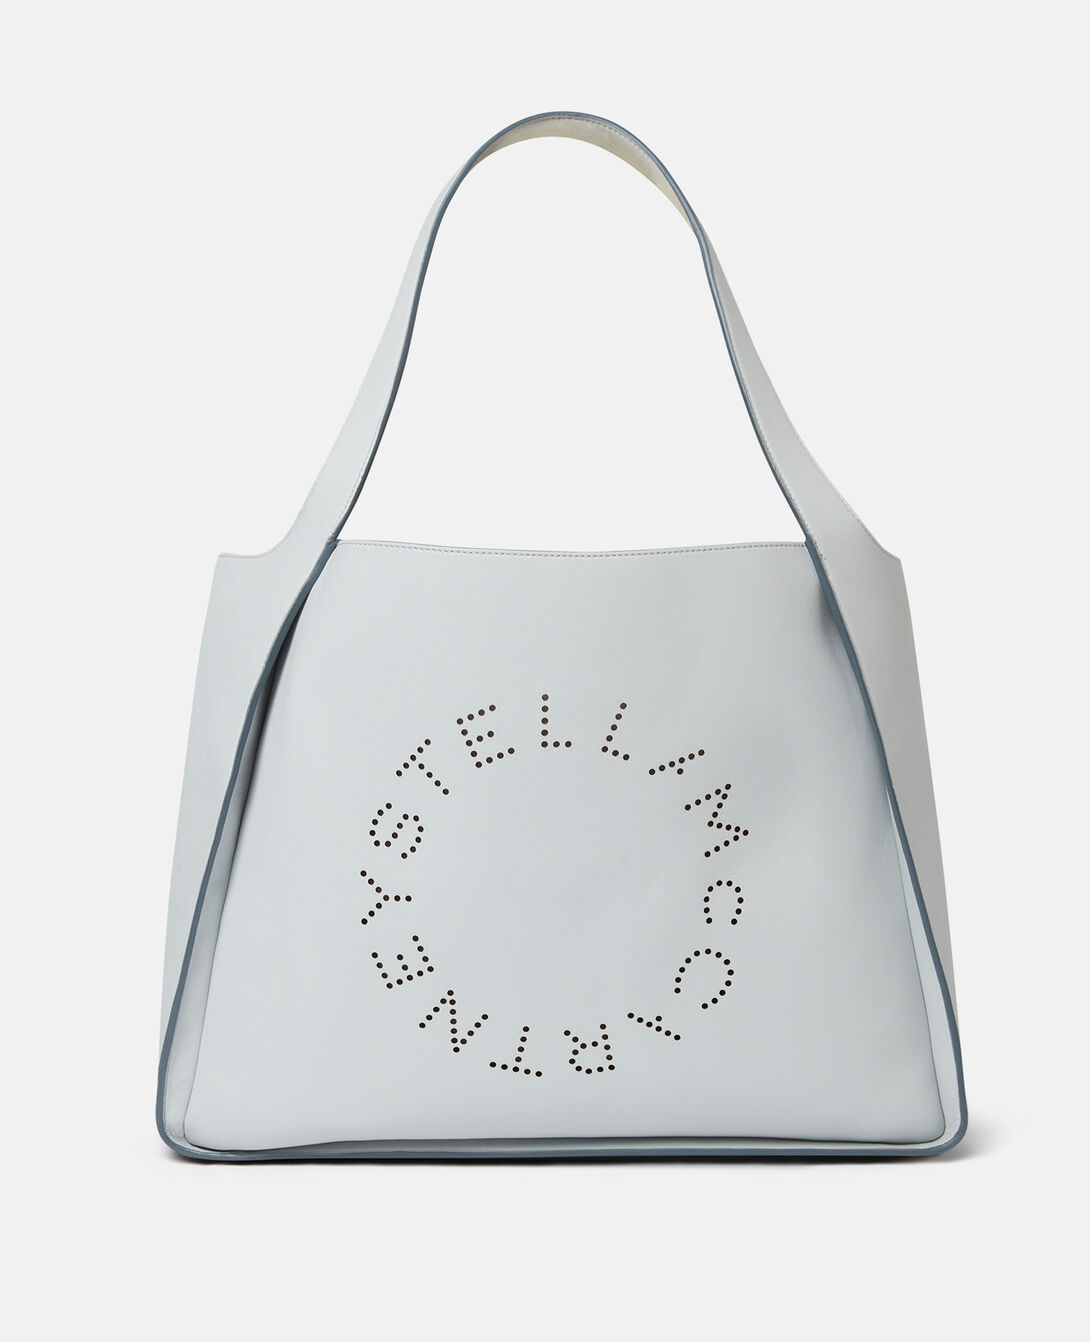 This is hands down one of my favourite Stella McCartney bags